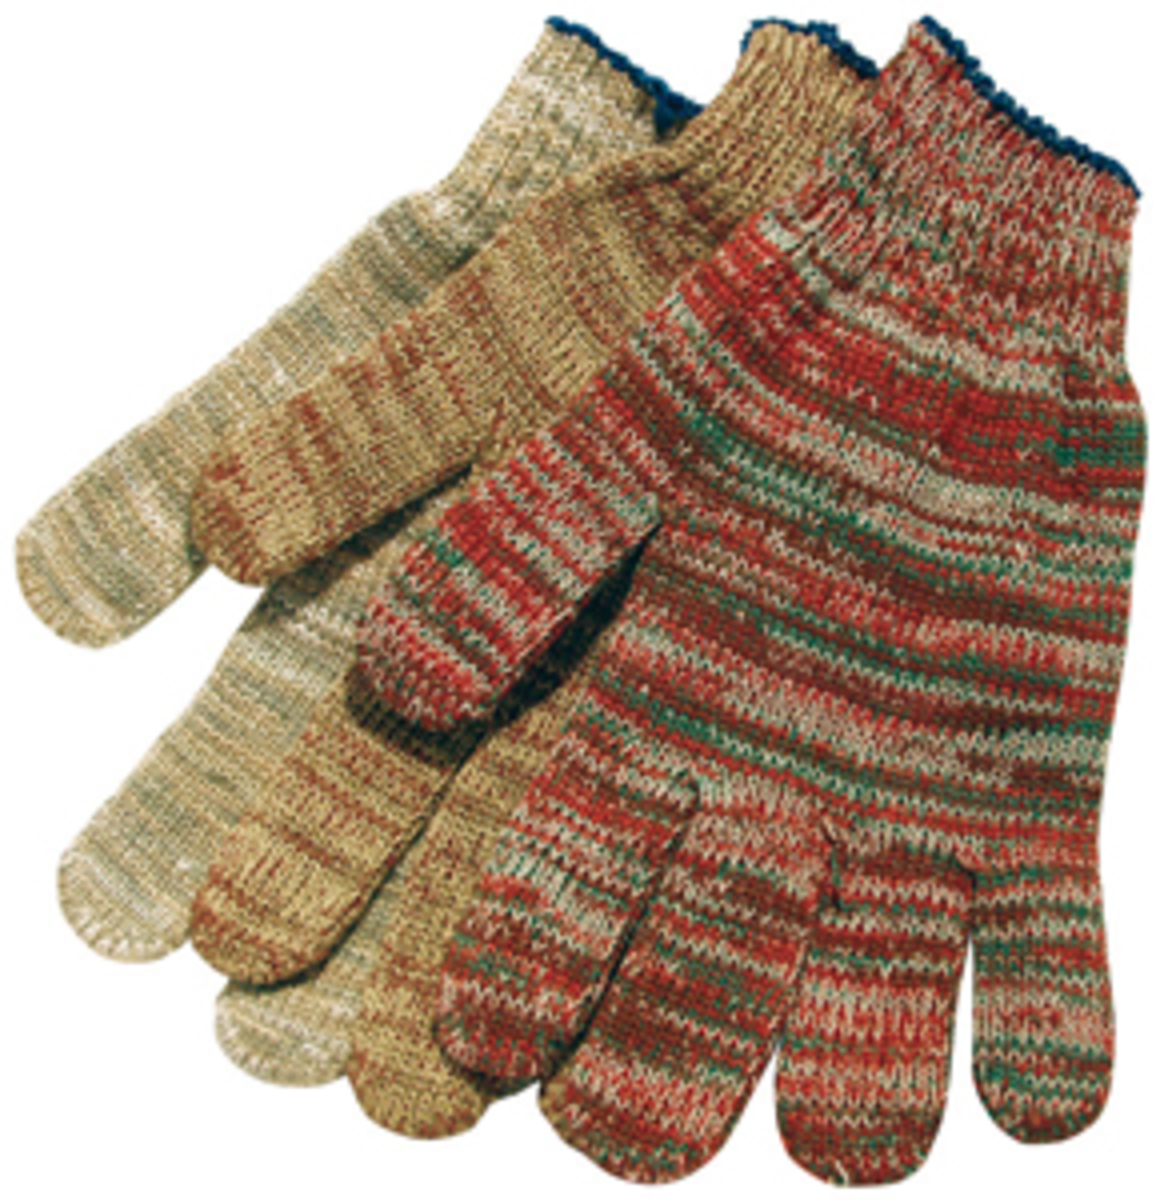 Memphis Glove Multi-Color Large 7 Gauge Cotton And Polyester String Knit Work Gloves With Knit Wrist